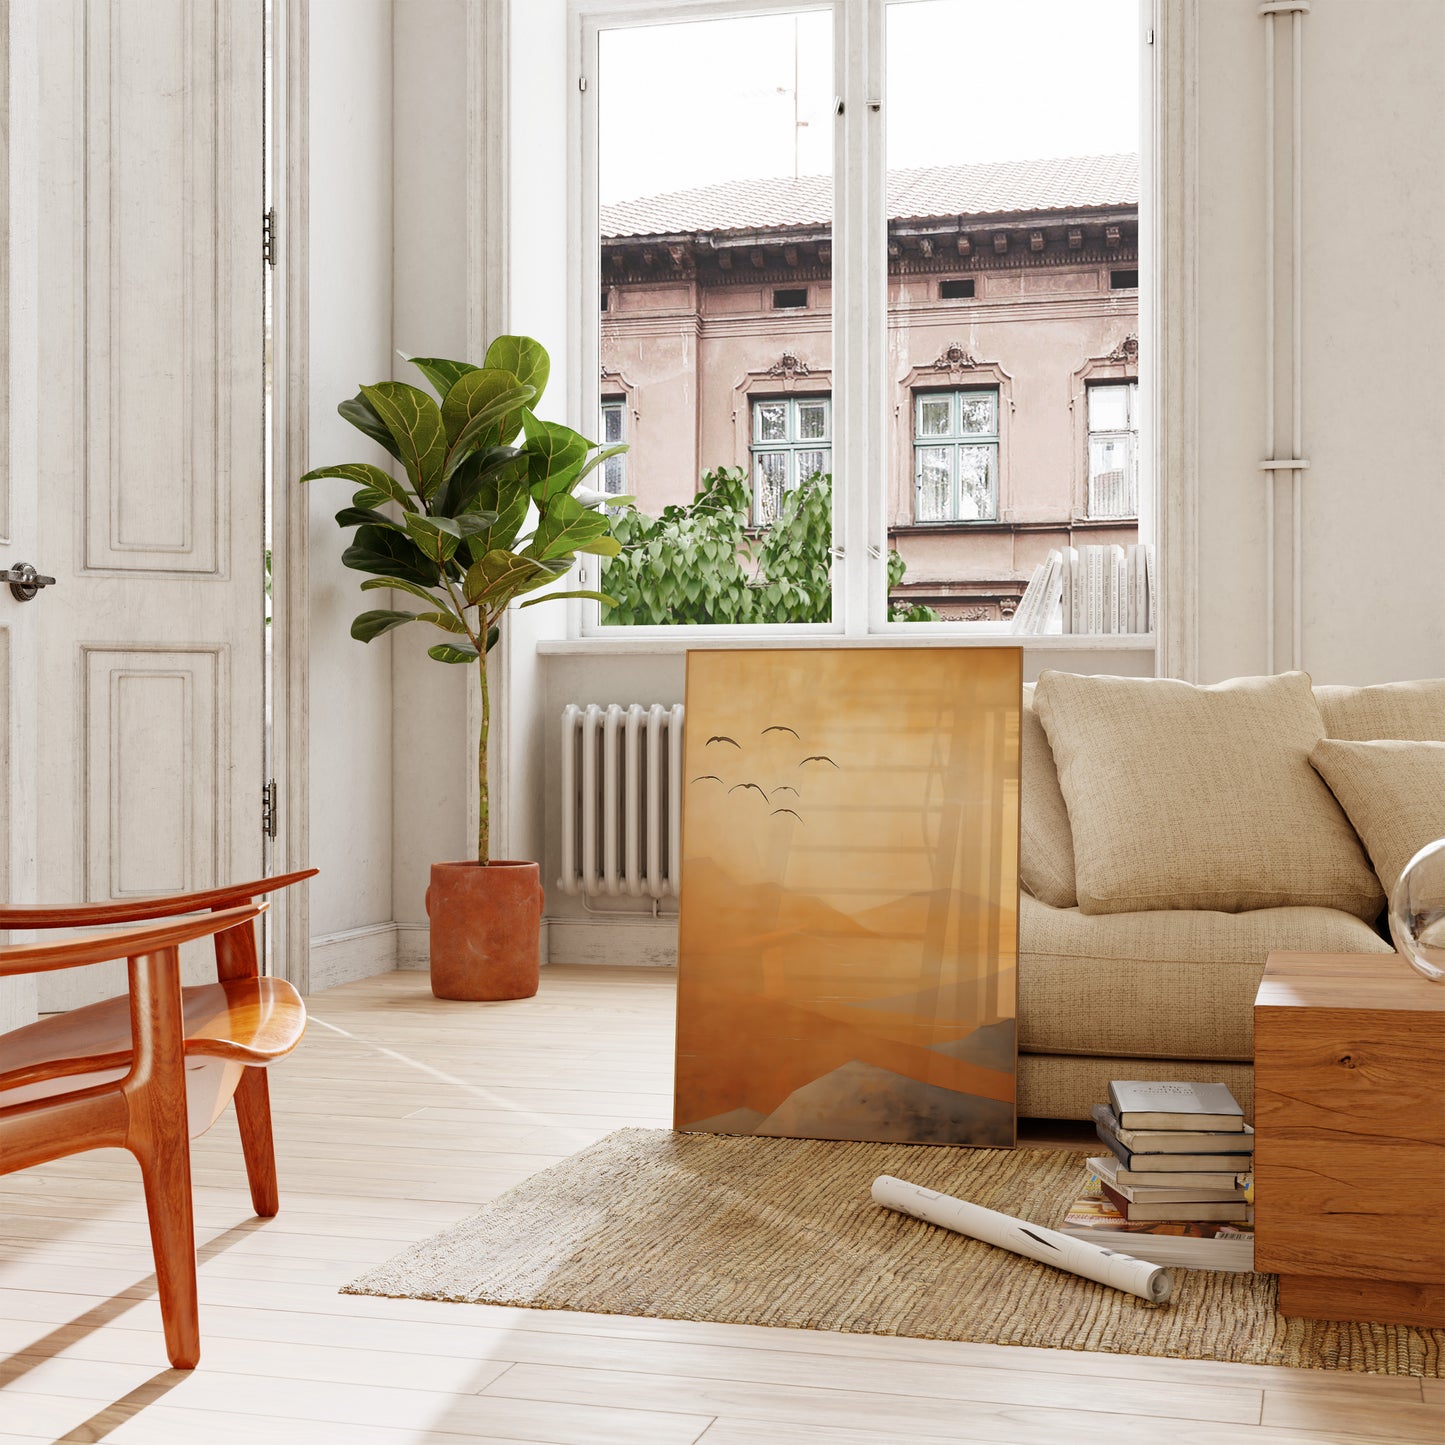 Bright living room with a beige sofa, wooden coffee table, plants, and artwork.